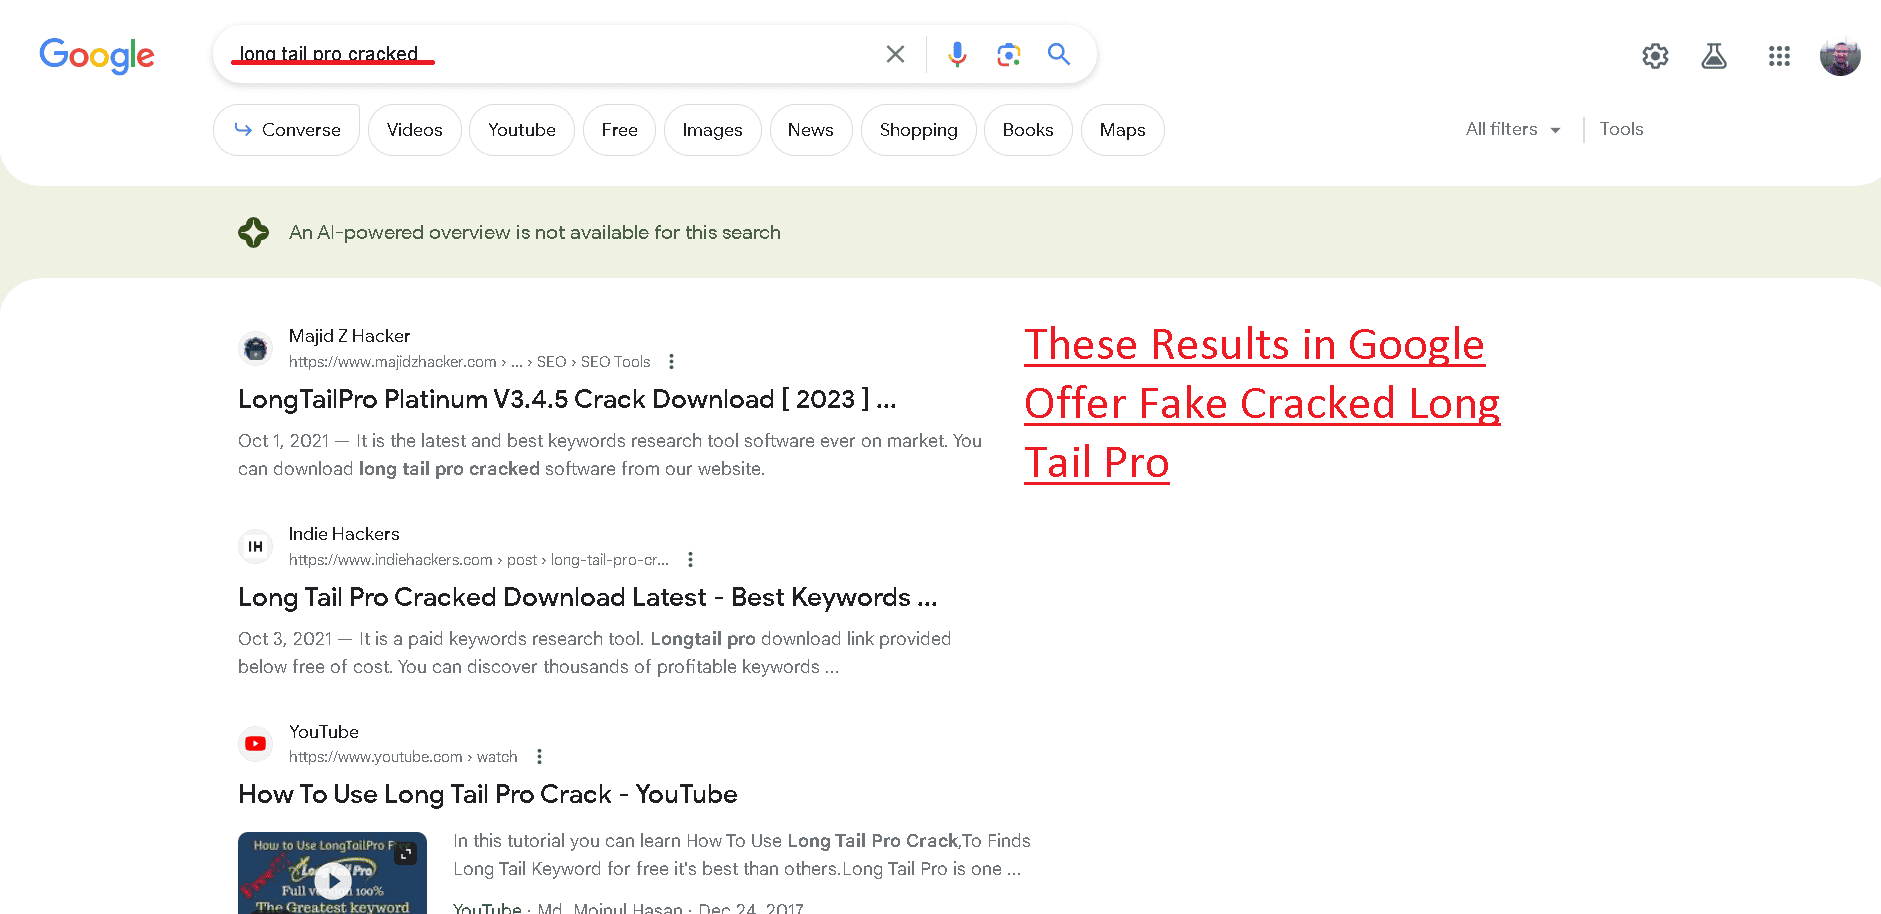 Long Tail Pro cracked version result in Google